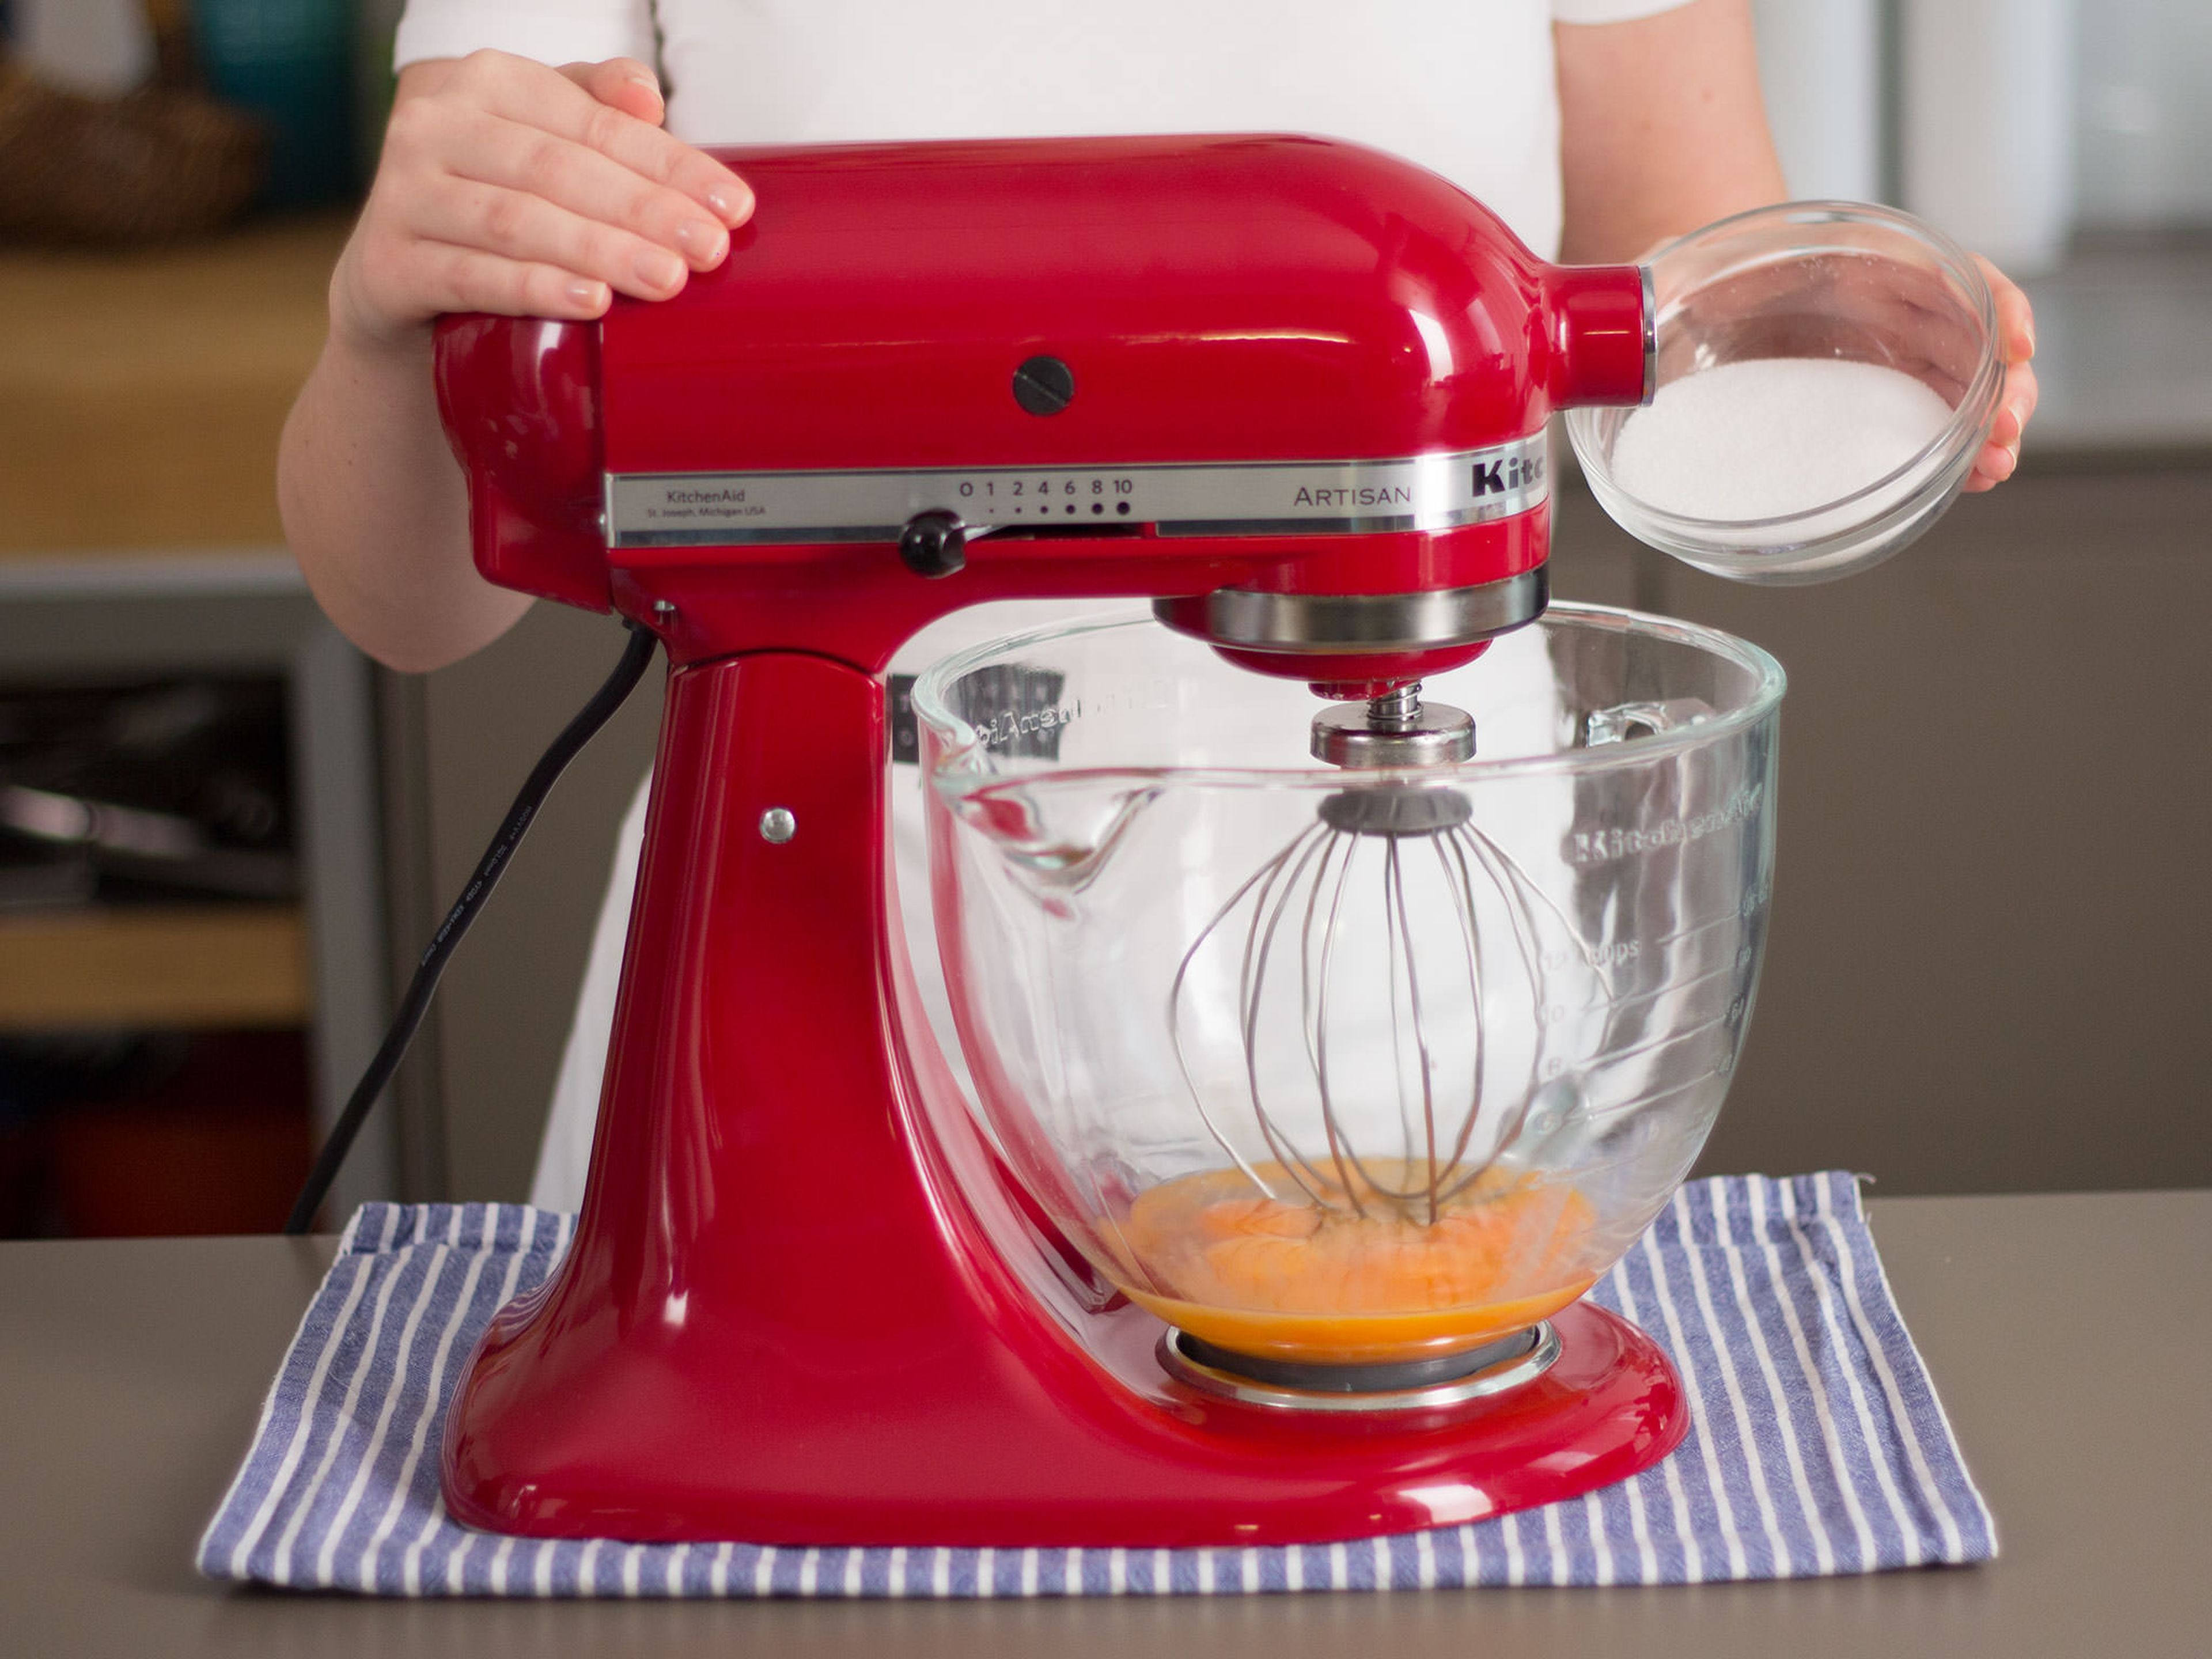 In a stand mixer, beat together egg yolks, eggs, and sugar until stiff peaks form.